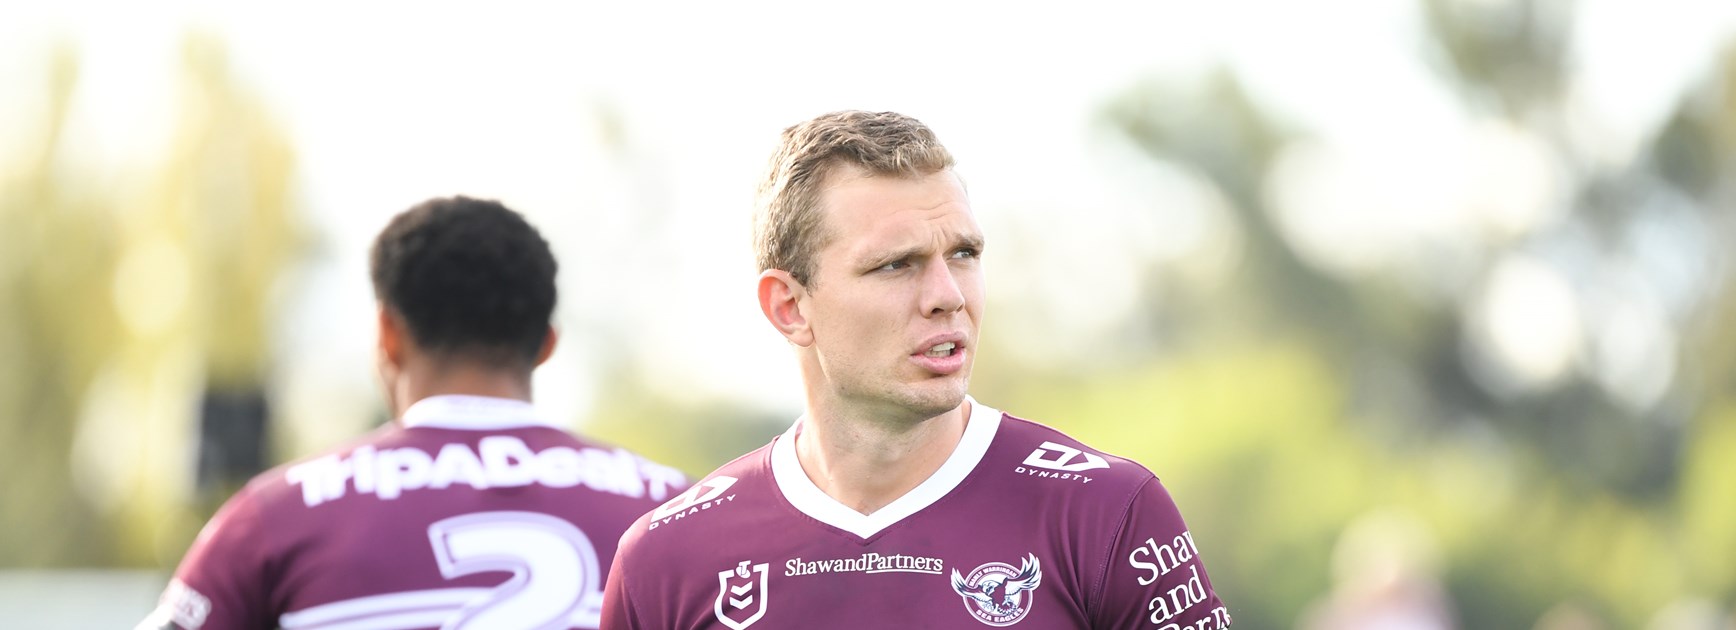 Trbojevic to undergo surgery in injury blow for Sea Eagles